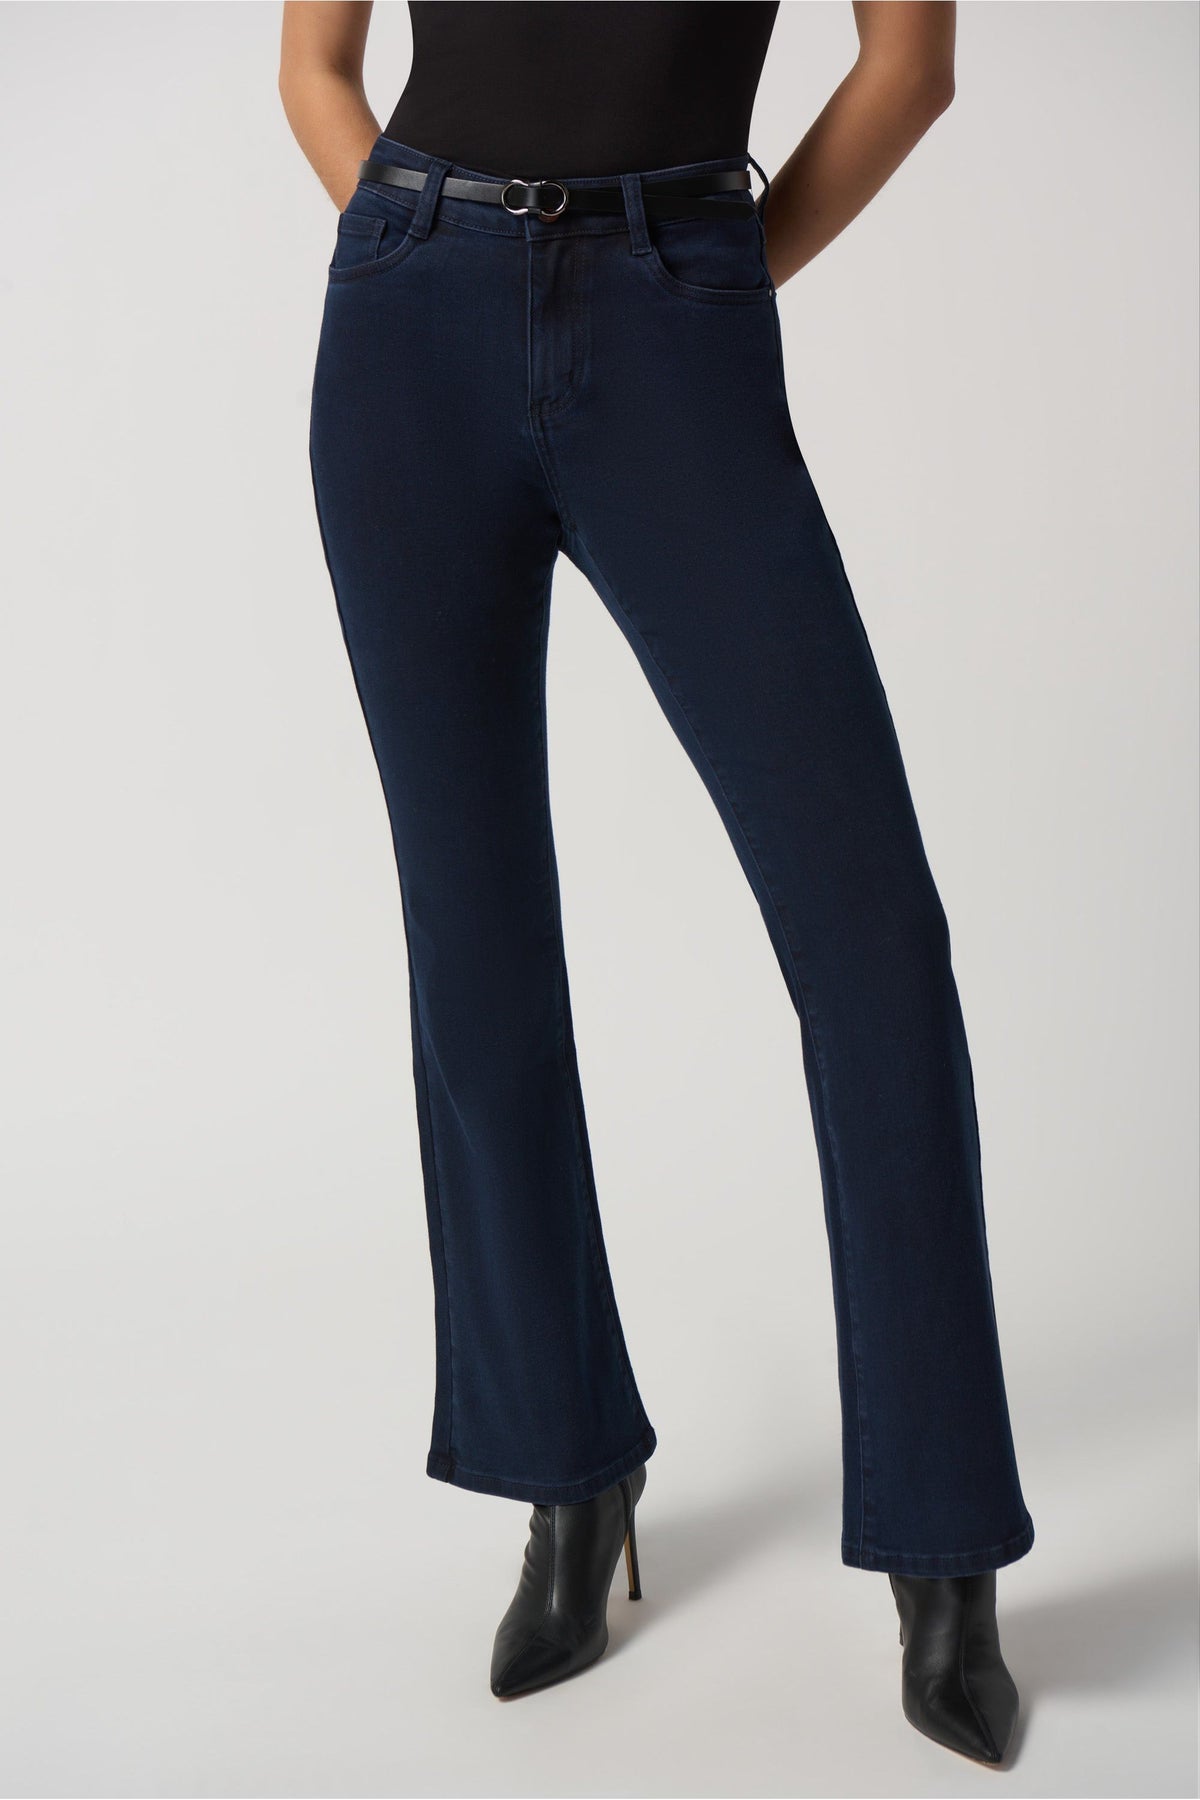 Jeans – Close To You Boutique